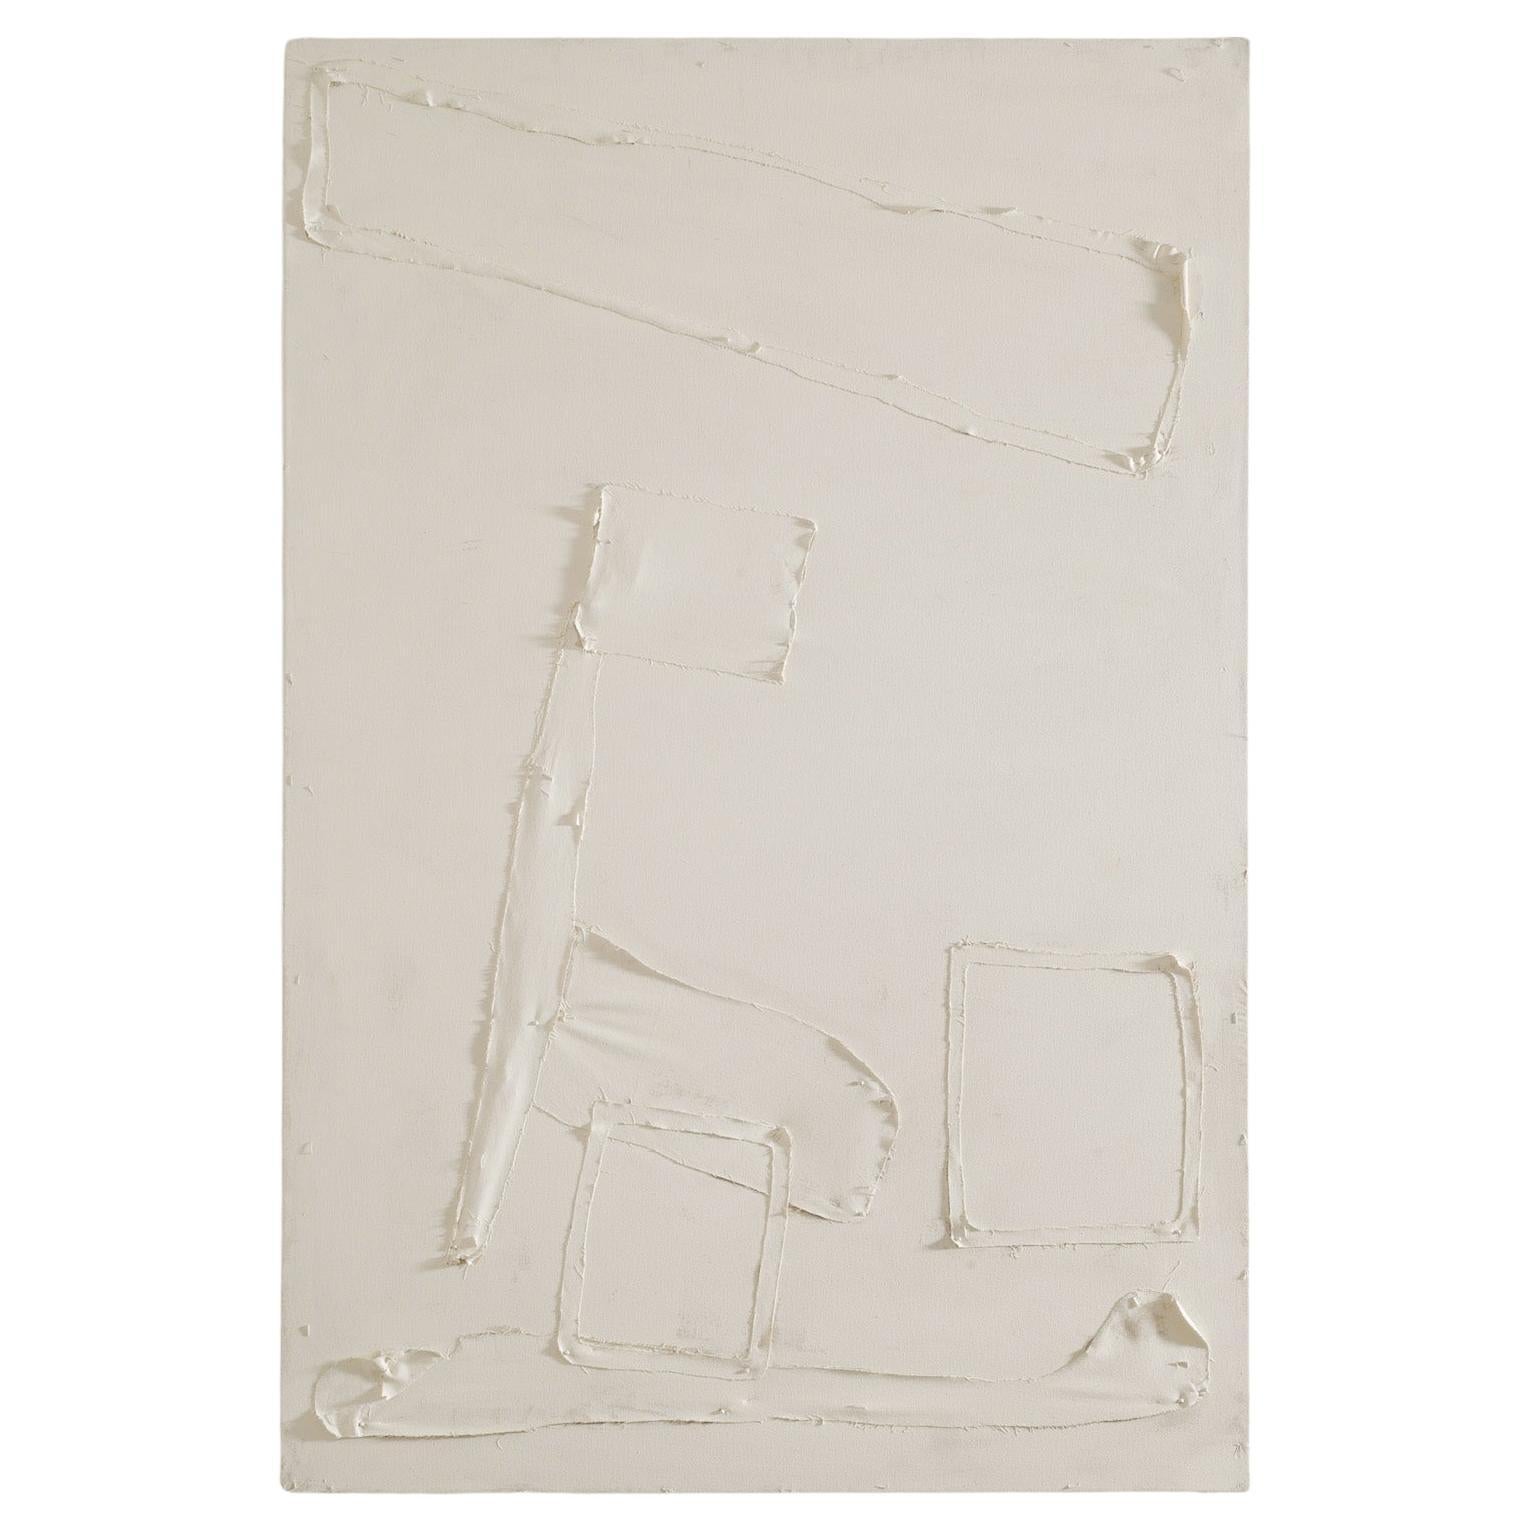 Wolfgang Voegele "Untitled" Abstract White Artwork on Canvas 60x40", 2019 For Sale